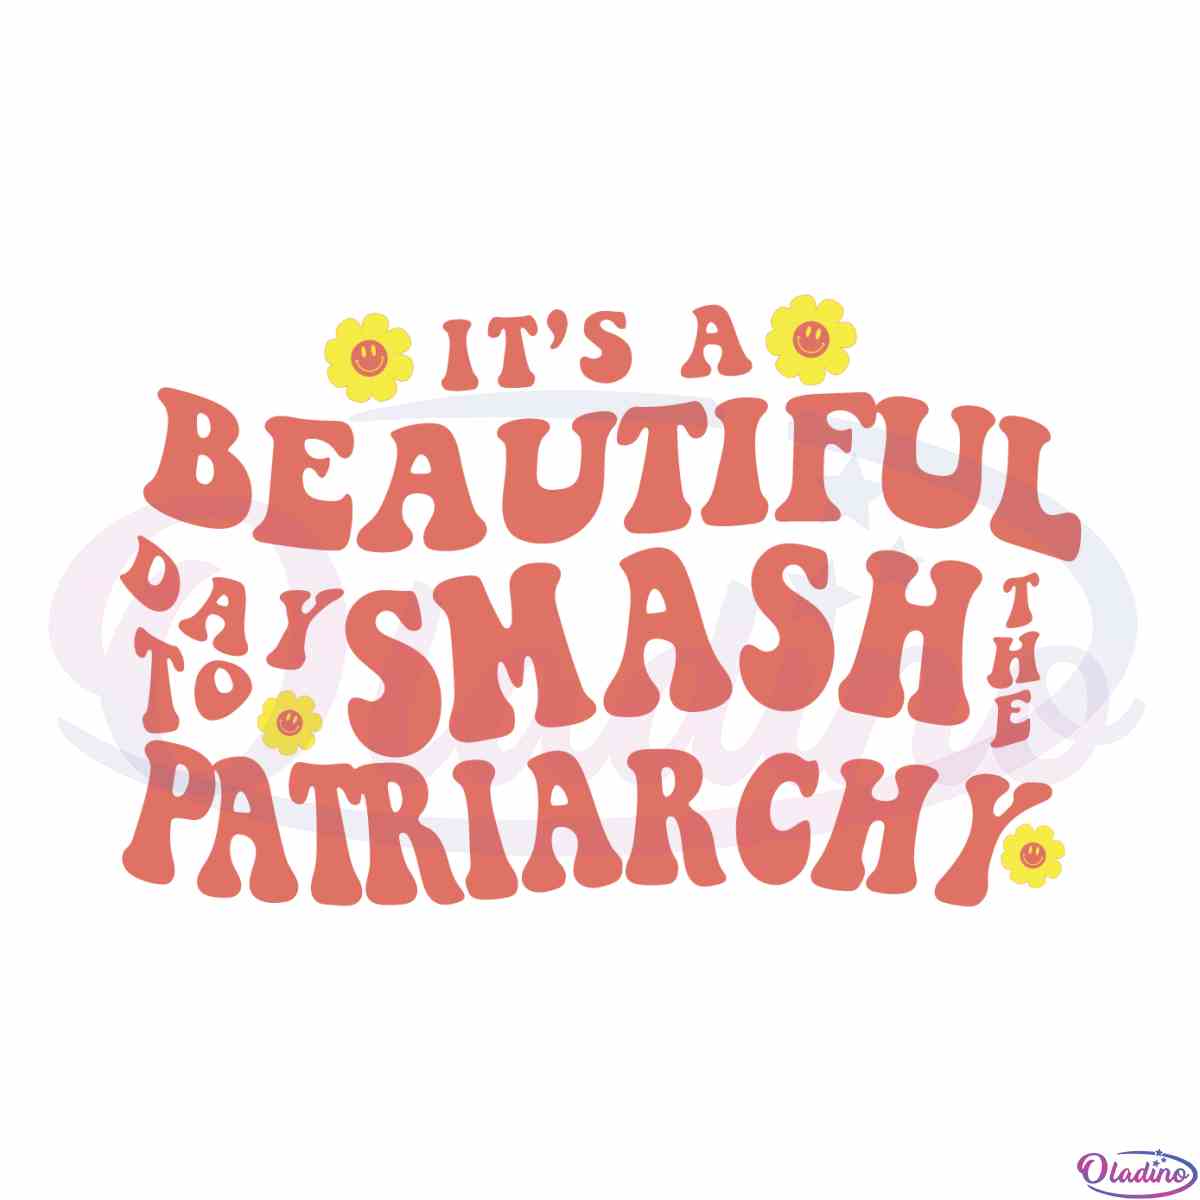 its-a-beautiful-day-to-smash-the-patriarchy-cricut-svg-cutting-files